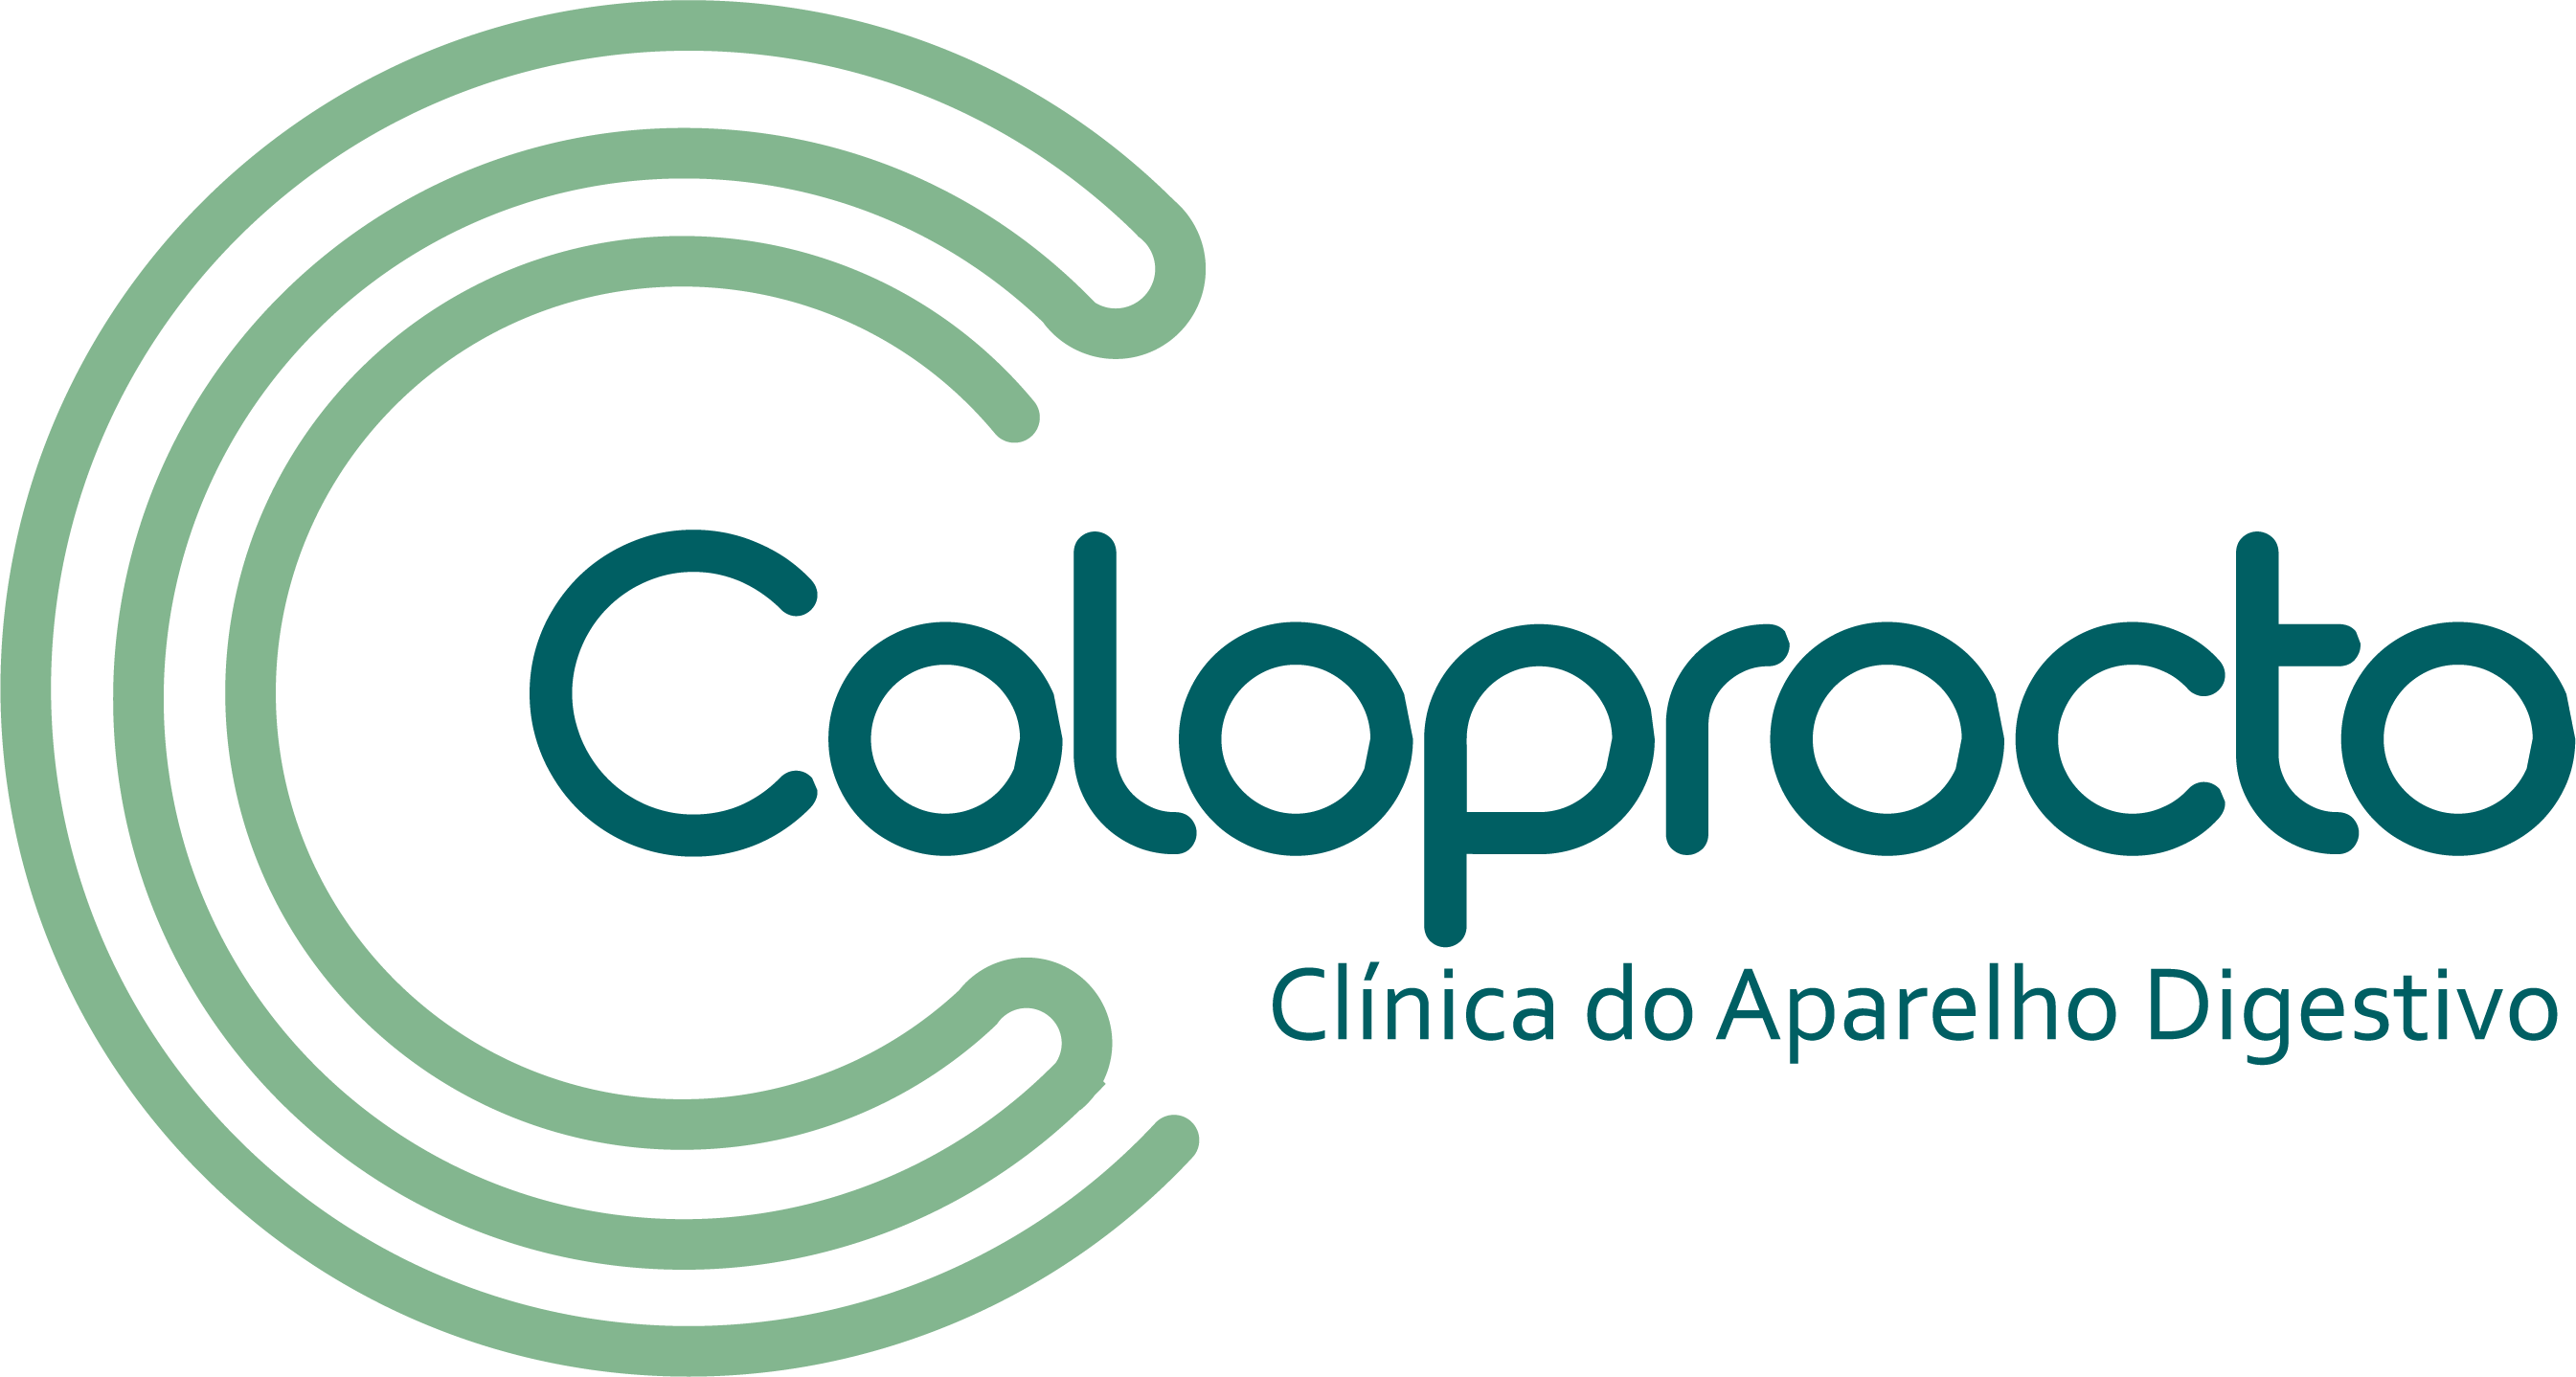 Coloprocto